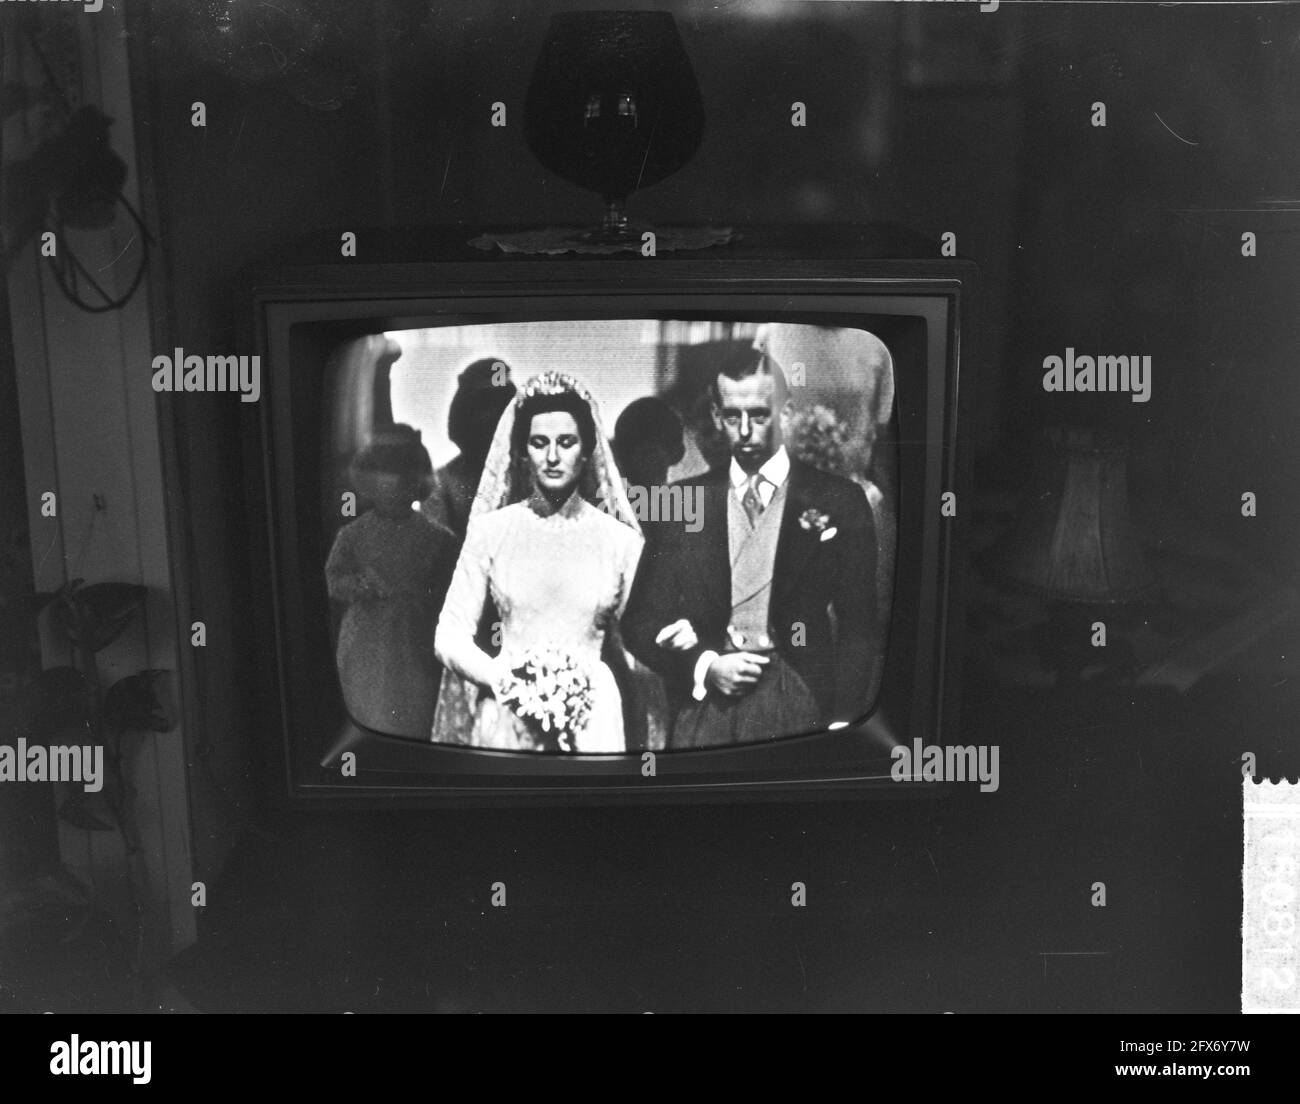 Marriage Alexandra of Kent to Angus Ogilvy at Westminster Abbey in London [photo from TV]. Princess Alexandra and her brother Prince Edward, the Duke of Kent, April 24, 1963, gentry, weddings, The Netherlands, 20th century press agency photo, news to remember, documentary, historic photography 1945-1990, visual stories, human history of the Twentieth Century, capturing moments in time Stock Photo